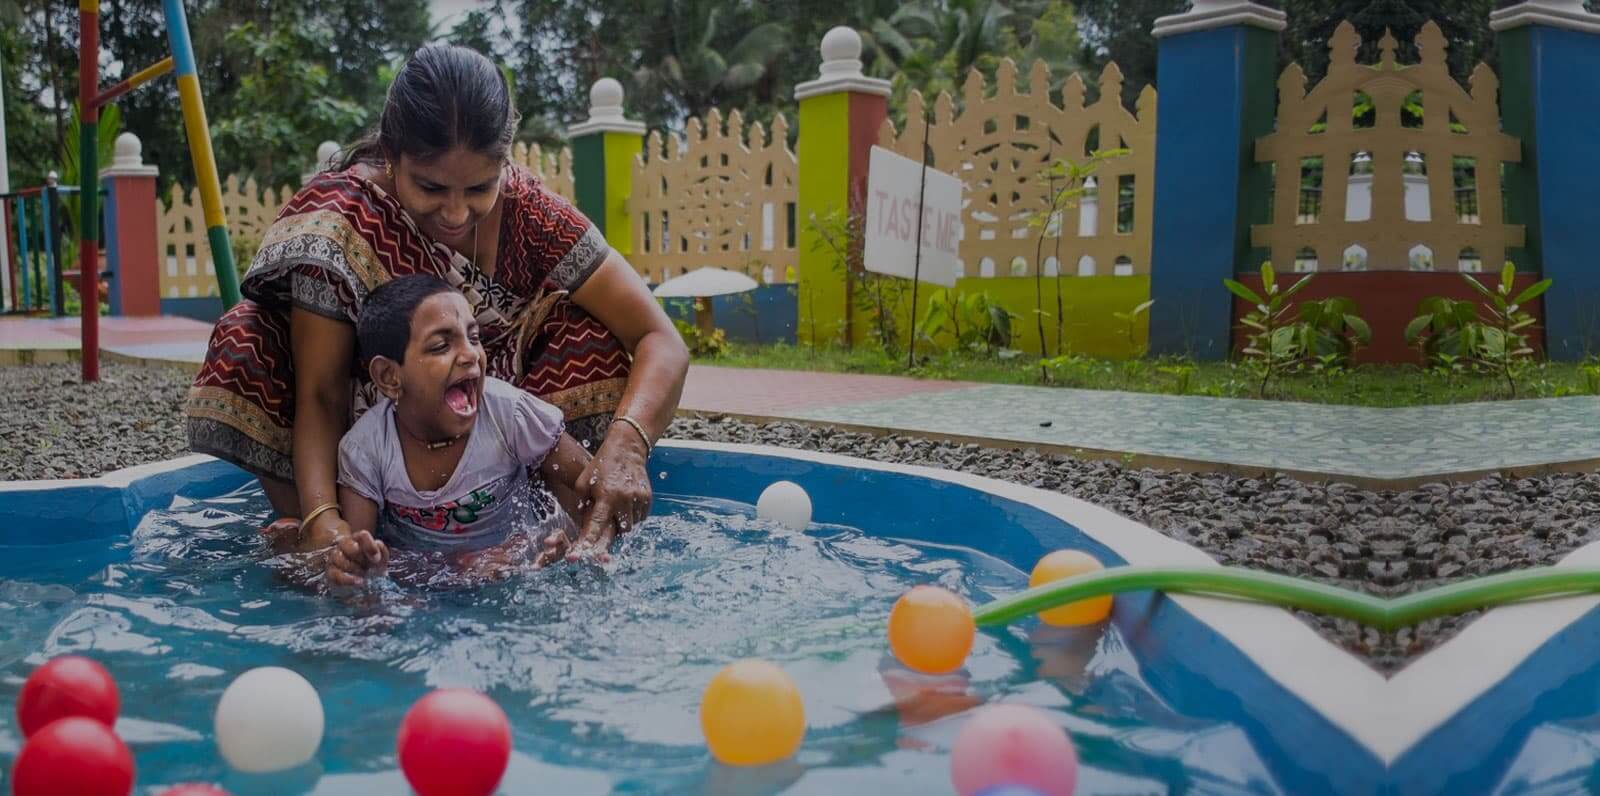 Teacher and a boy with deafblindness in sensory session in waterpool